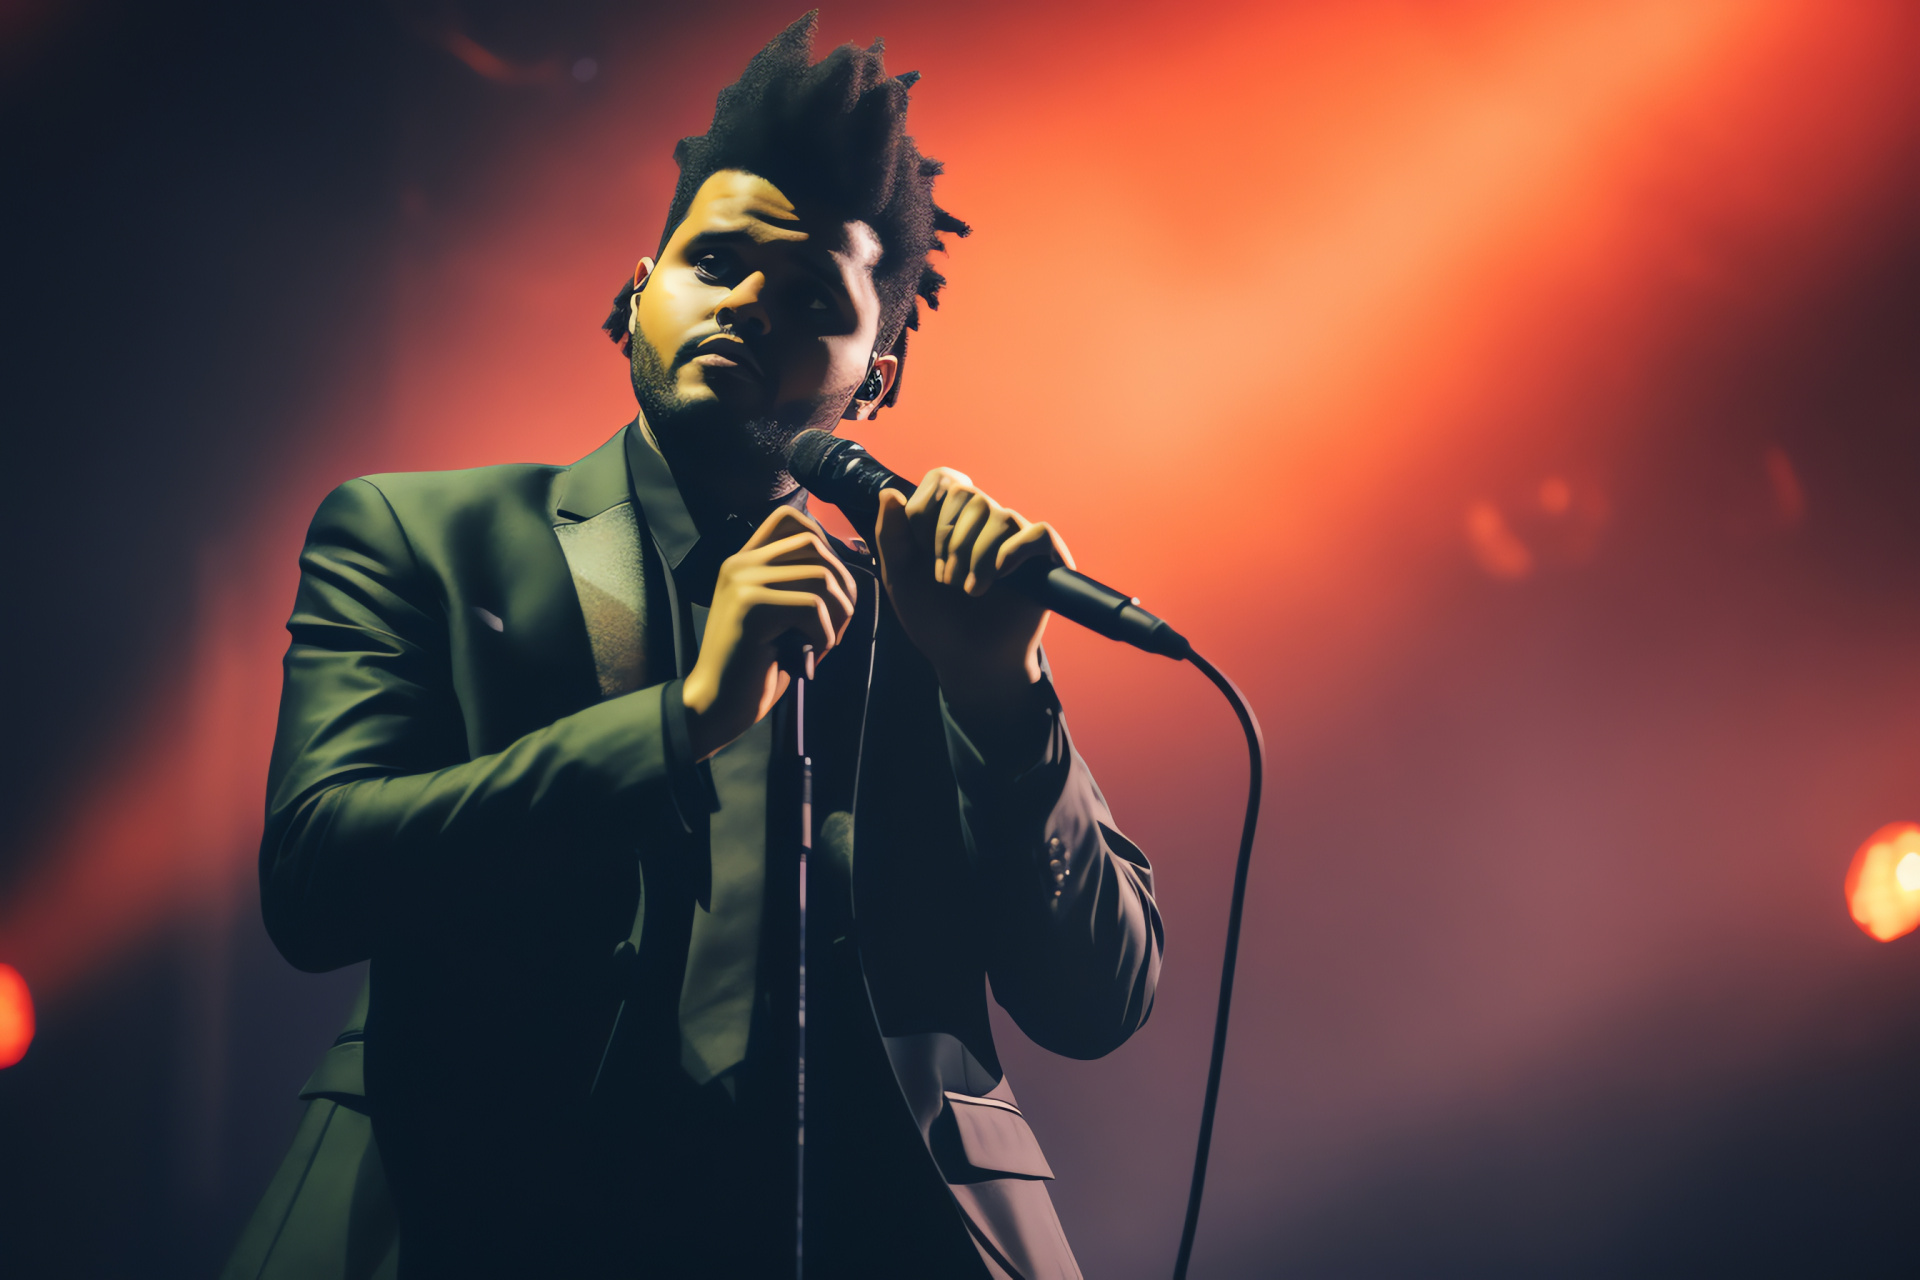 The Weeknd stage moment, Performance attire, Musical entertainer, Pro audio equipment, Event atmosphere, HD Desktop Image